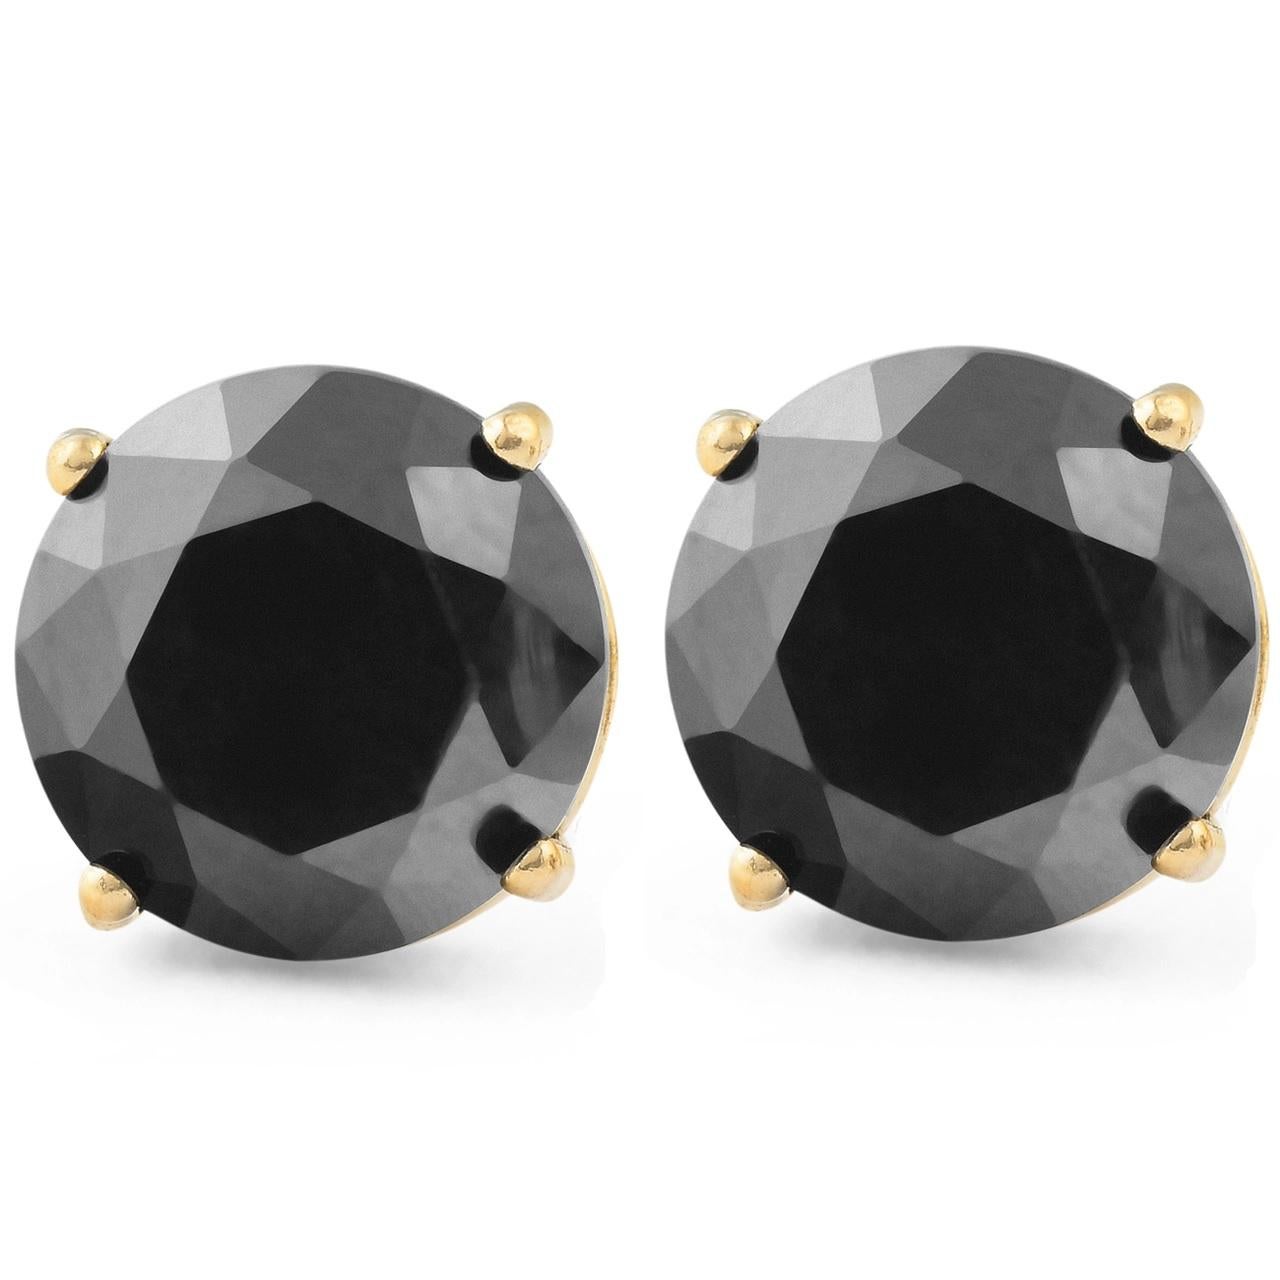 Contemporary 0.88 Carat Total Round Black Diamond Solitaire Stud Earrings in 14 K Yellow Gold